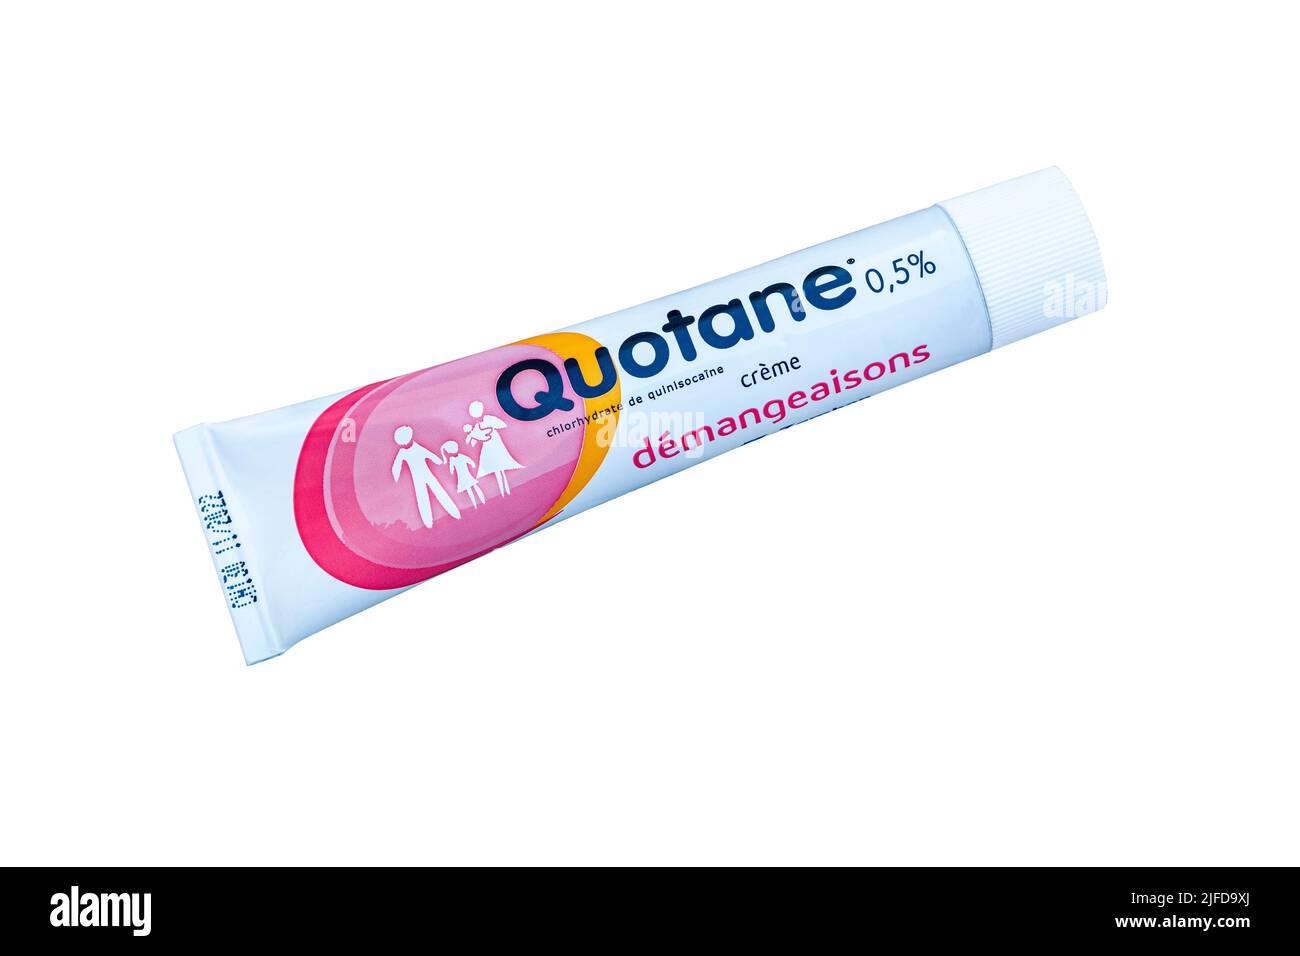 A tube of Quotane itching cream Stock Photo